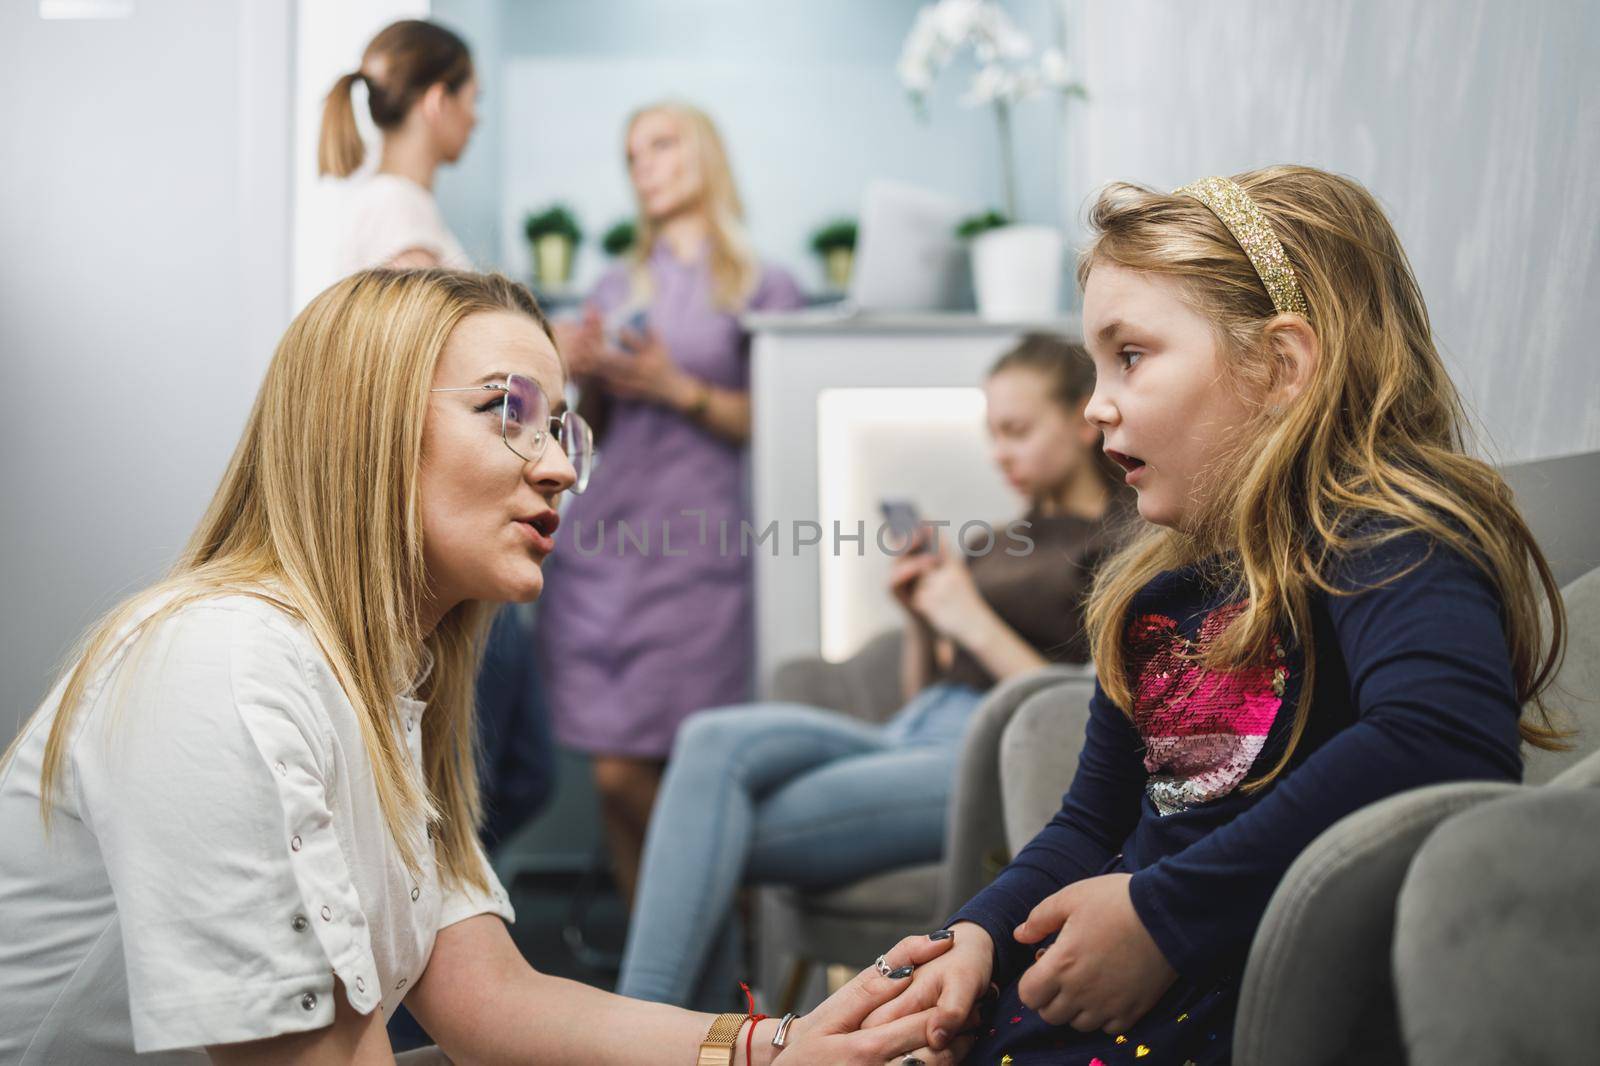 Dentist And Little Girl Talking In Waiting Room by MilanMarkovic78